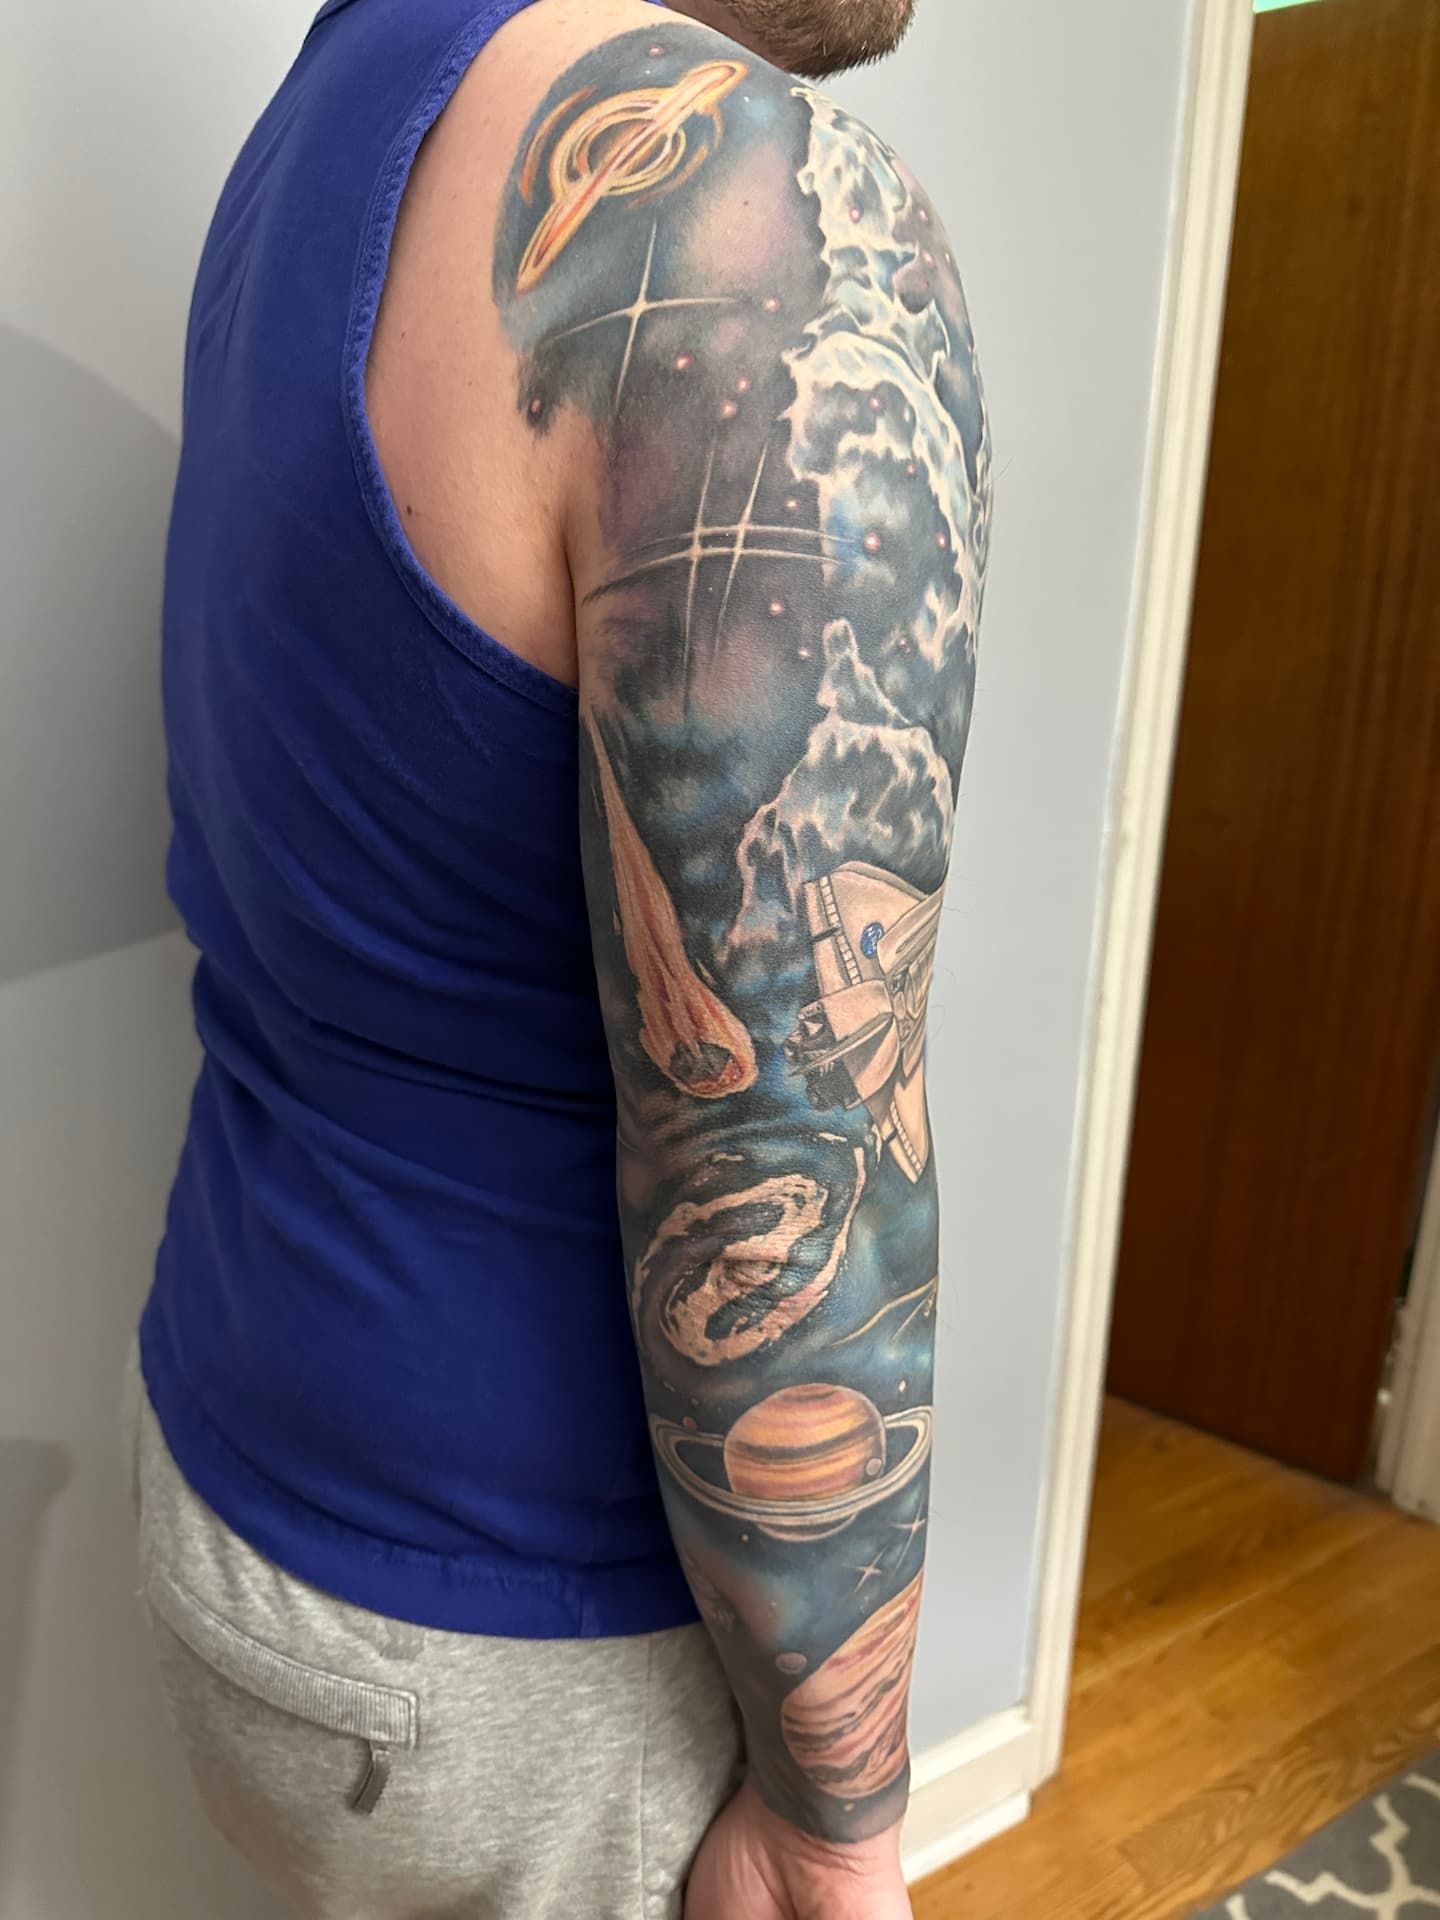 The back of my sleeve featuring saturn, jupiter, a galaxy, a meteor, and a black hole